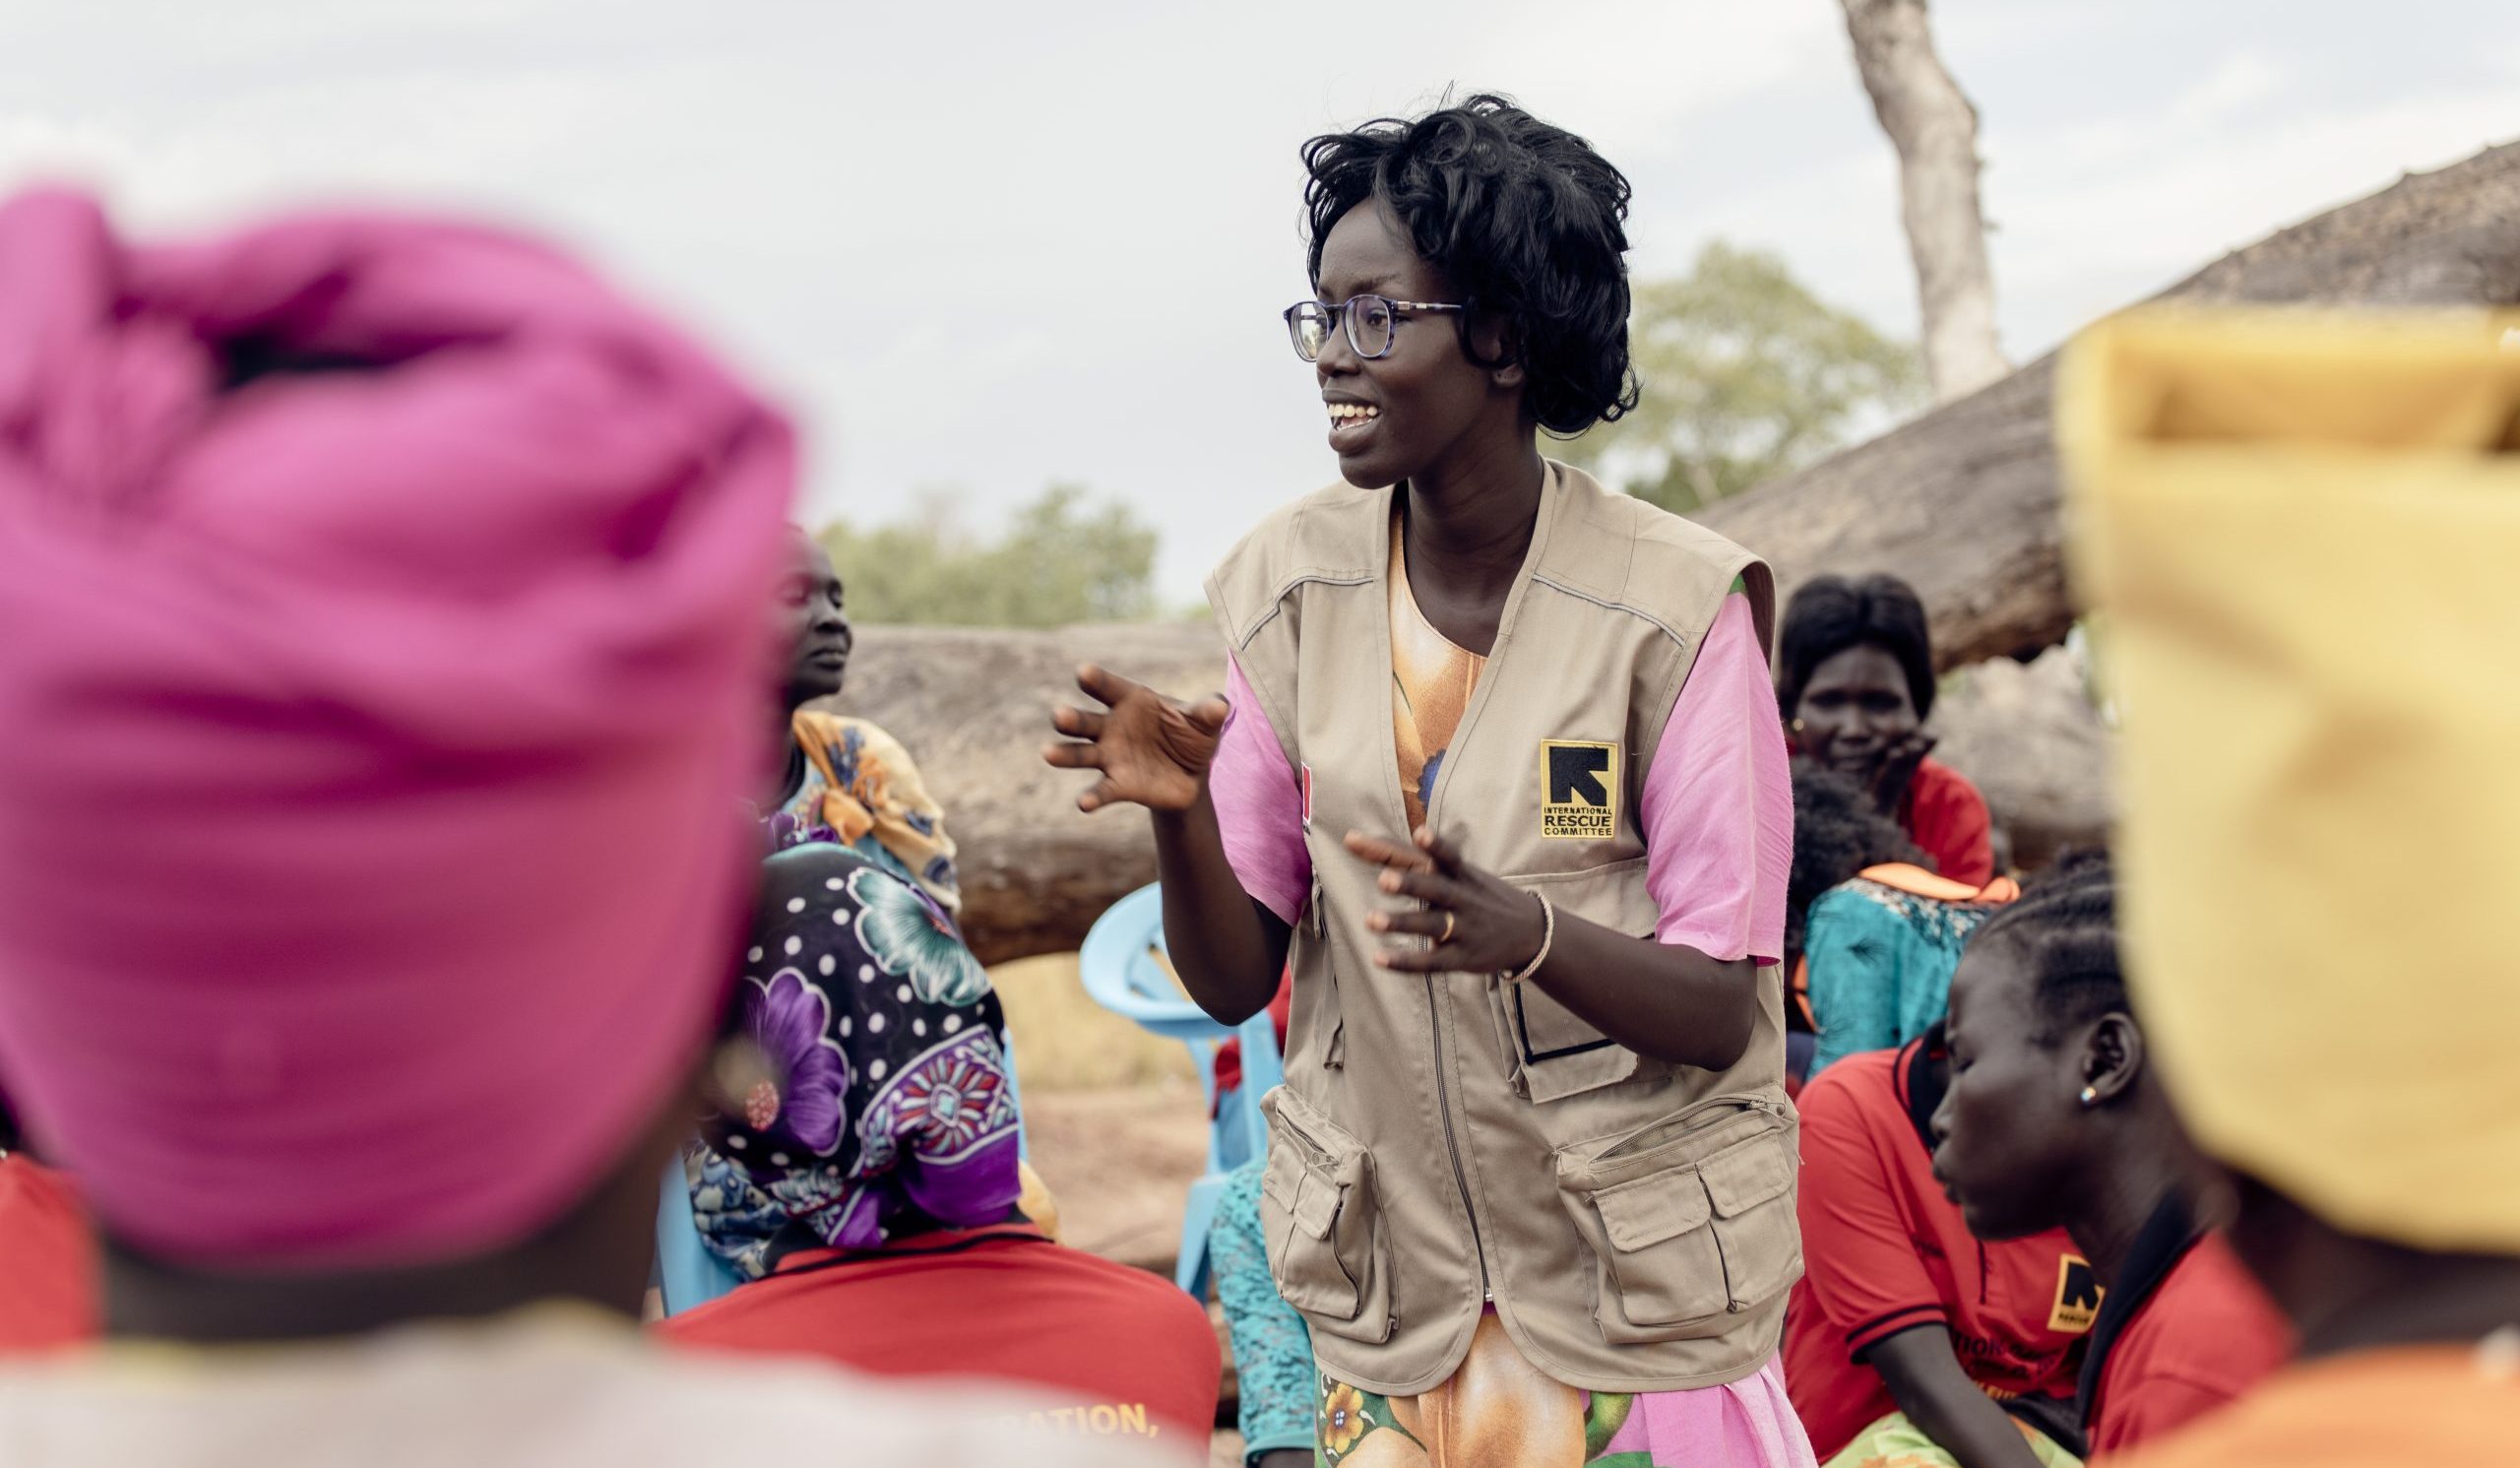 Tabetha, an IRC WPE case manager, animates the women during a "coffee, tea and talk" session at the Women and Girls Safe space in Jamjang, South Sudan, Monday, Oct. 11, 2021. Image courtesy of the International Rescue Committee.